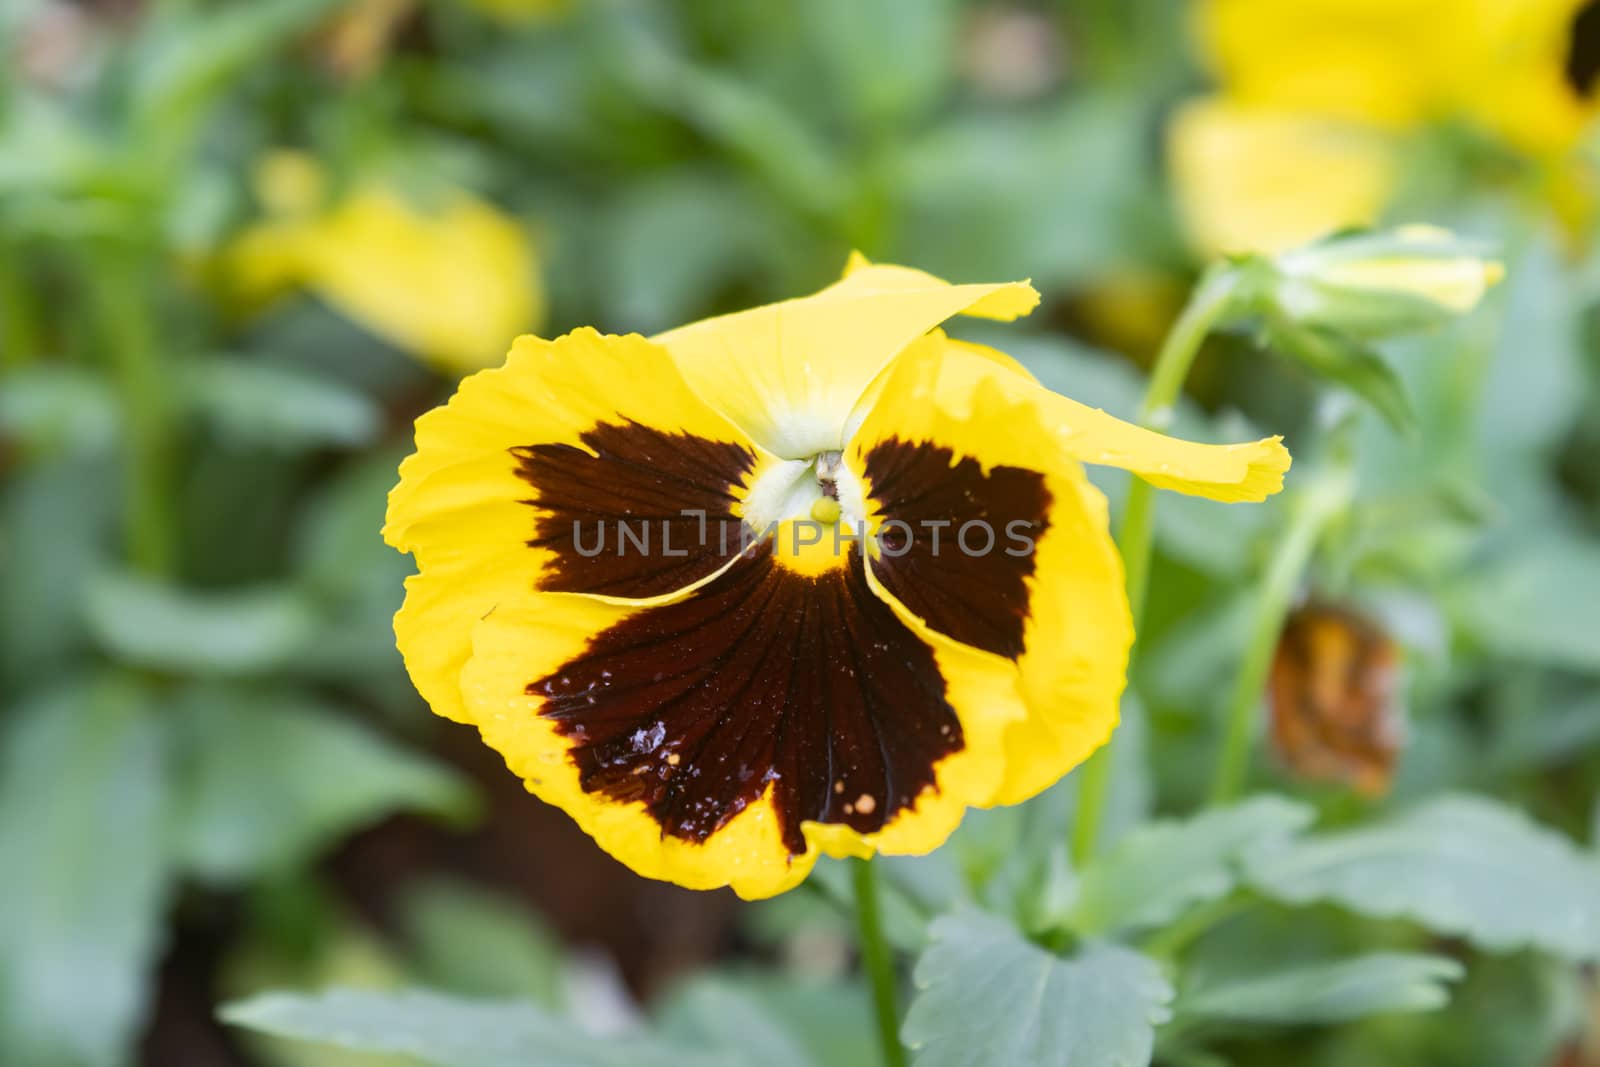 Pansy Flower and Water Drop in Garden by steafpong